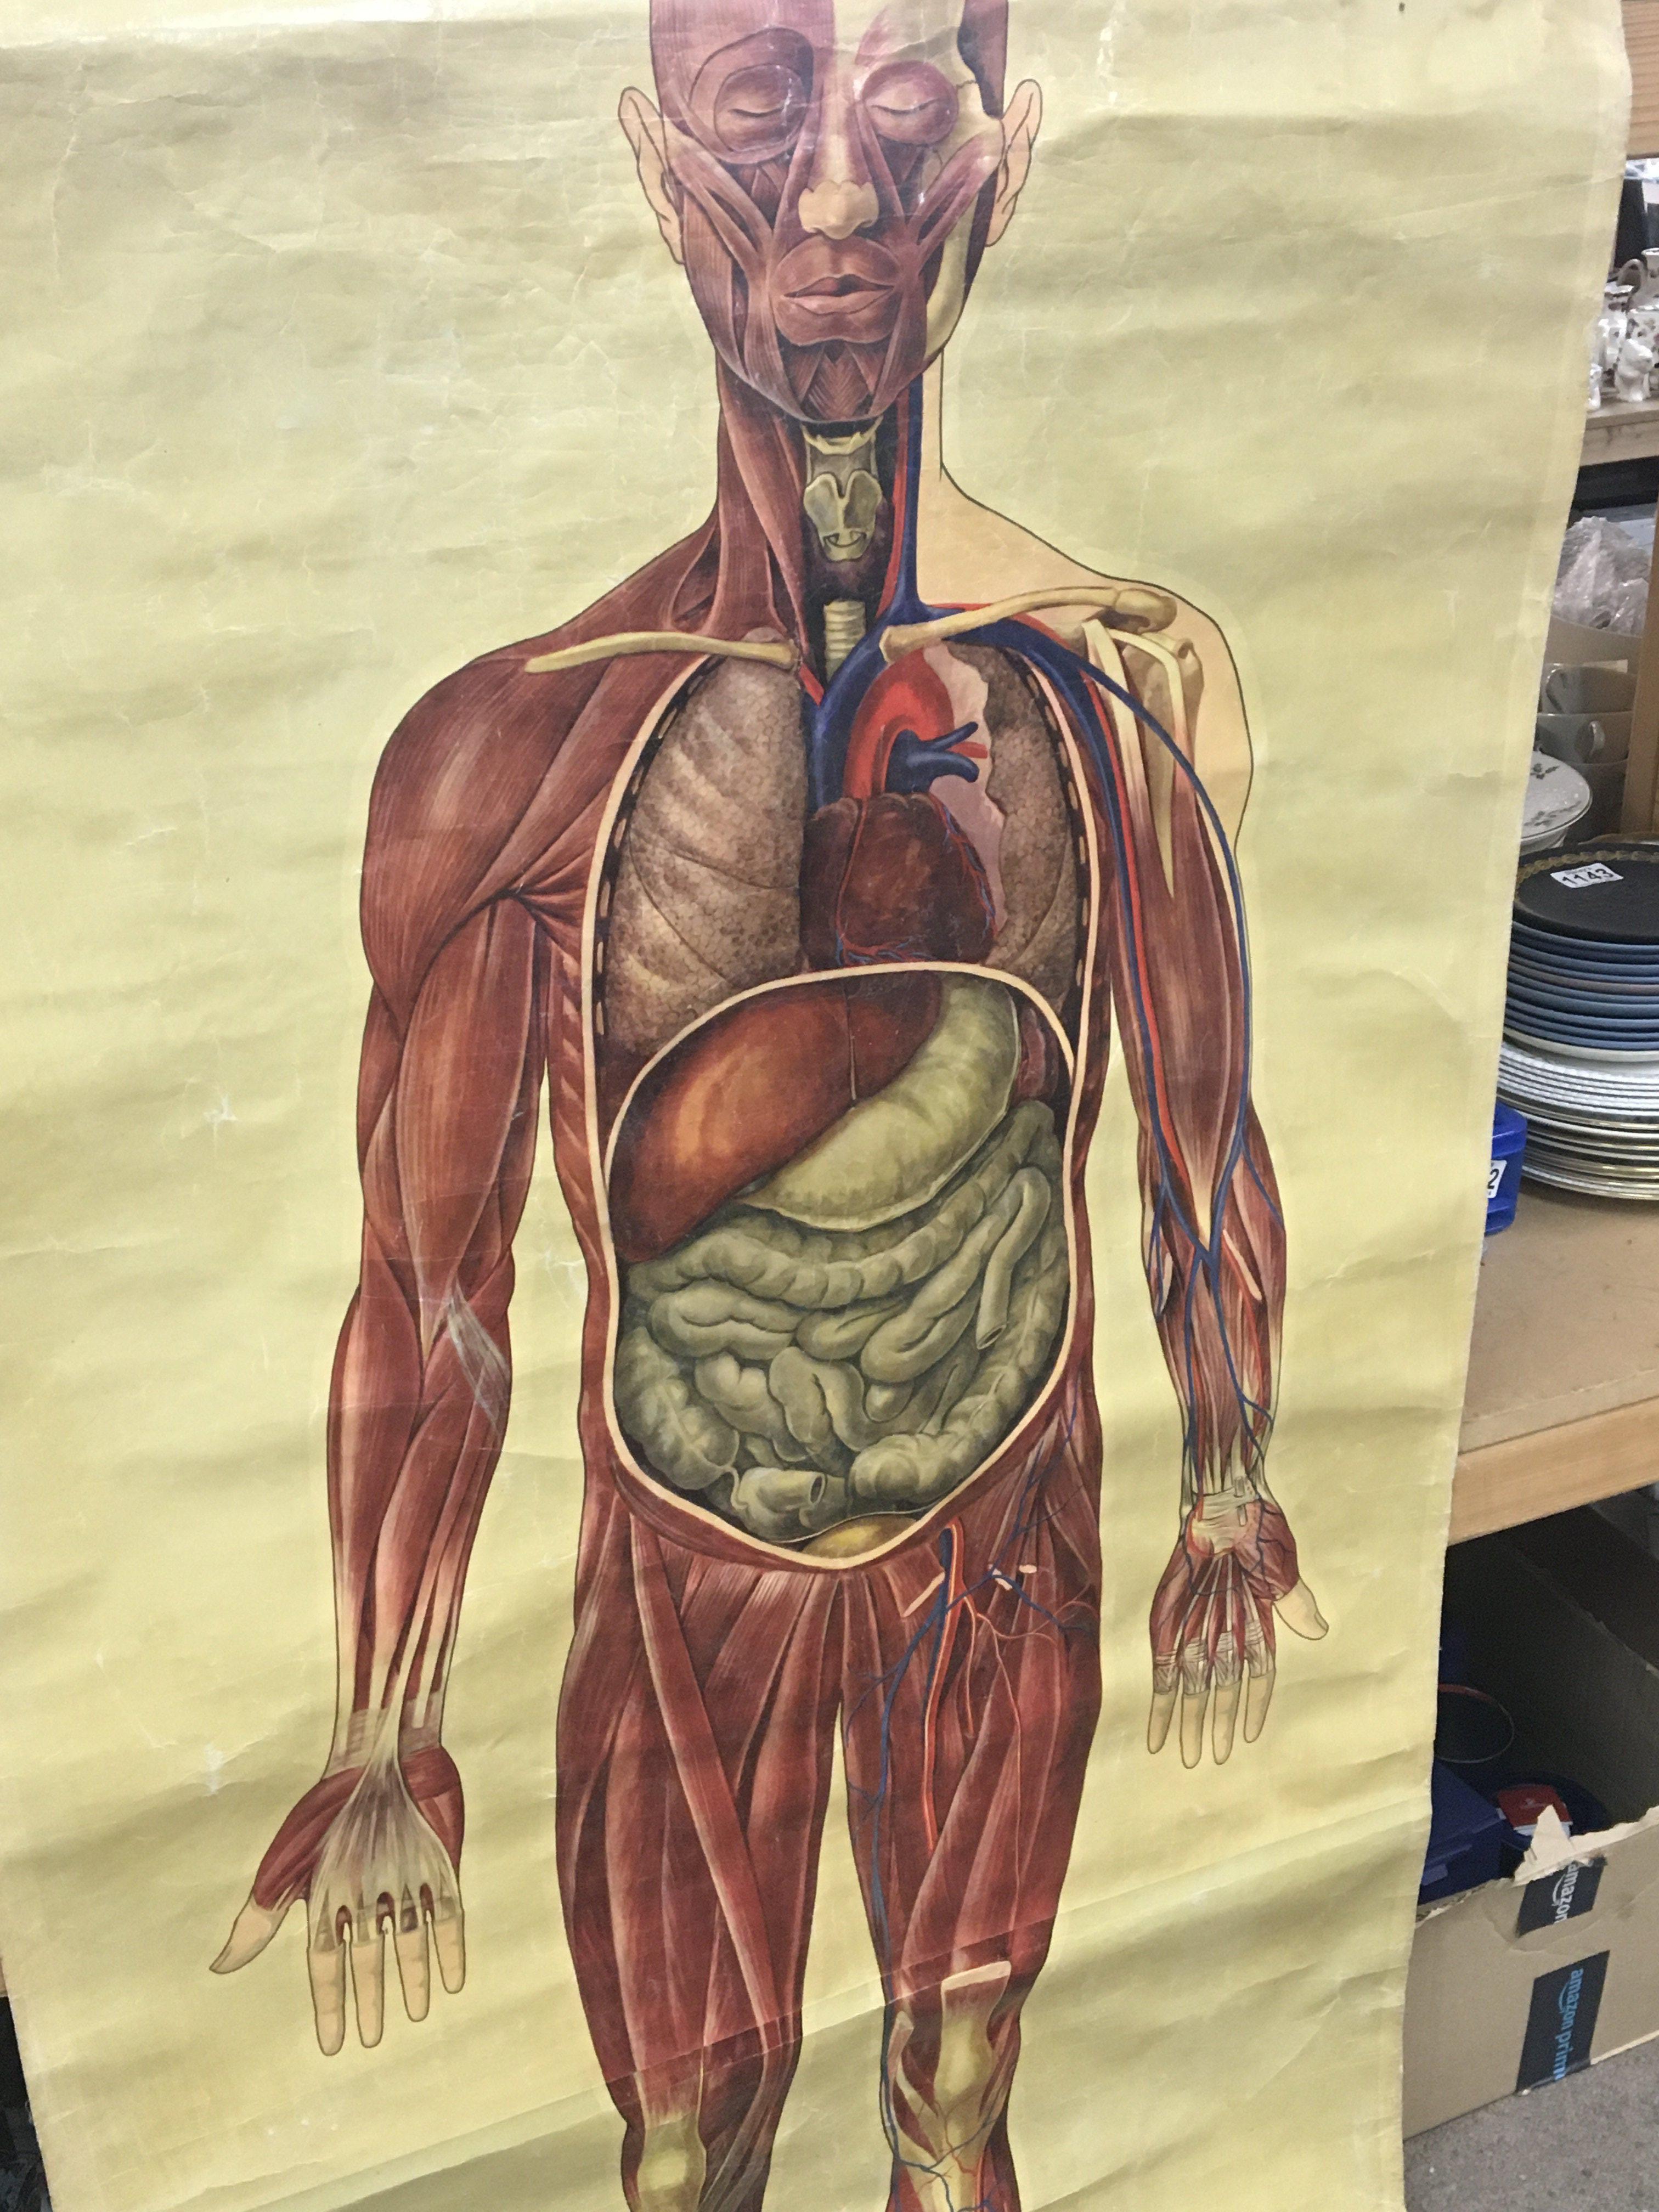 A Vintage St John Ambulance poster a collection of medical books and anatomy posters. - Image 2 of 3